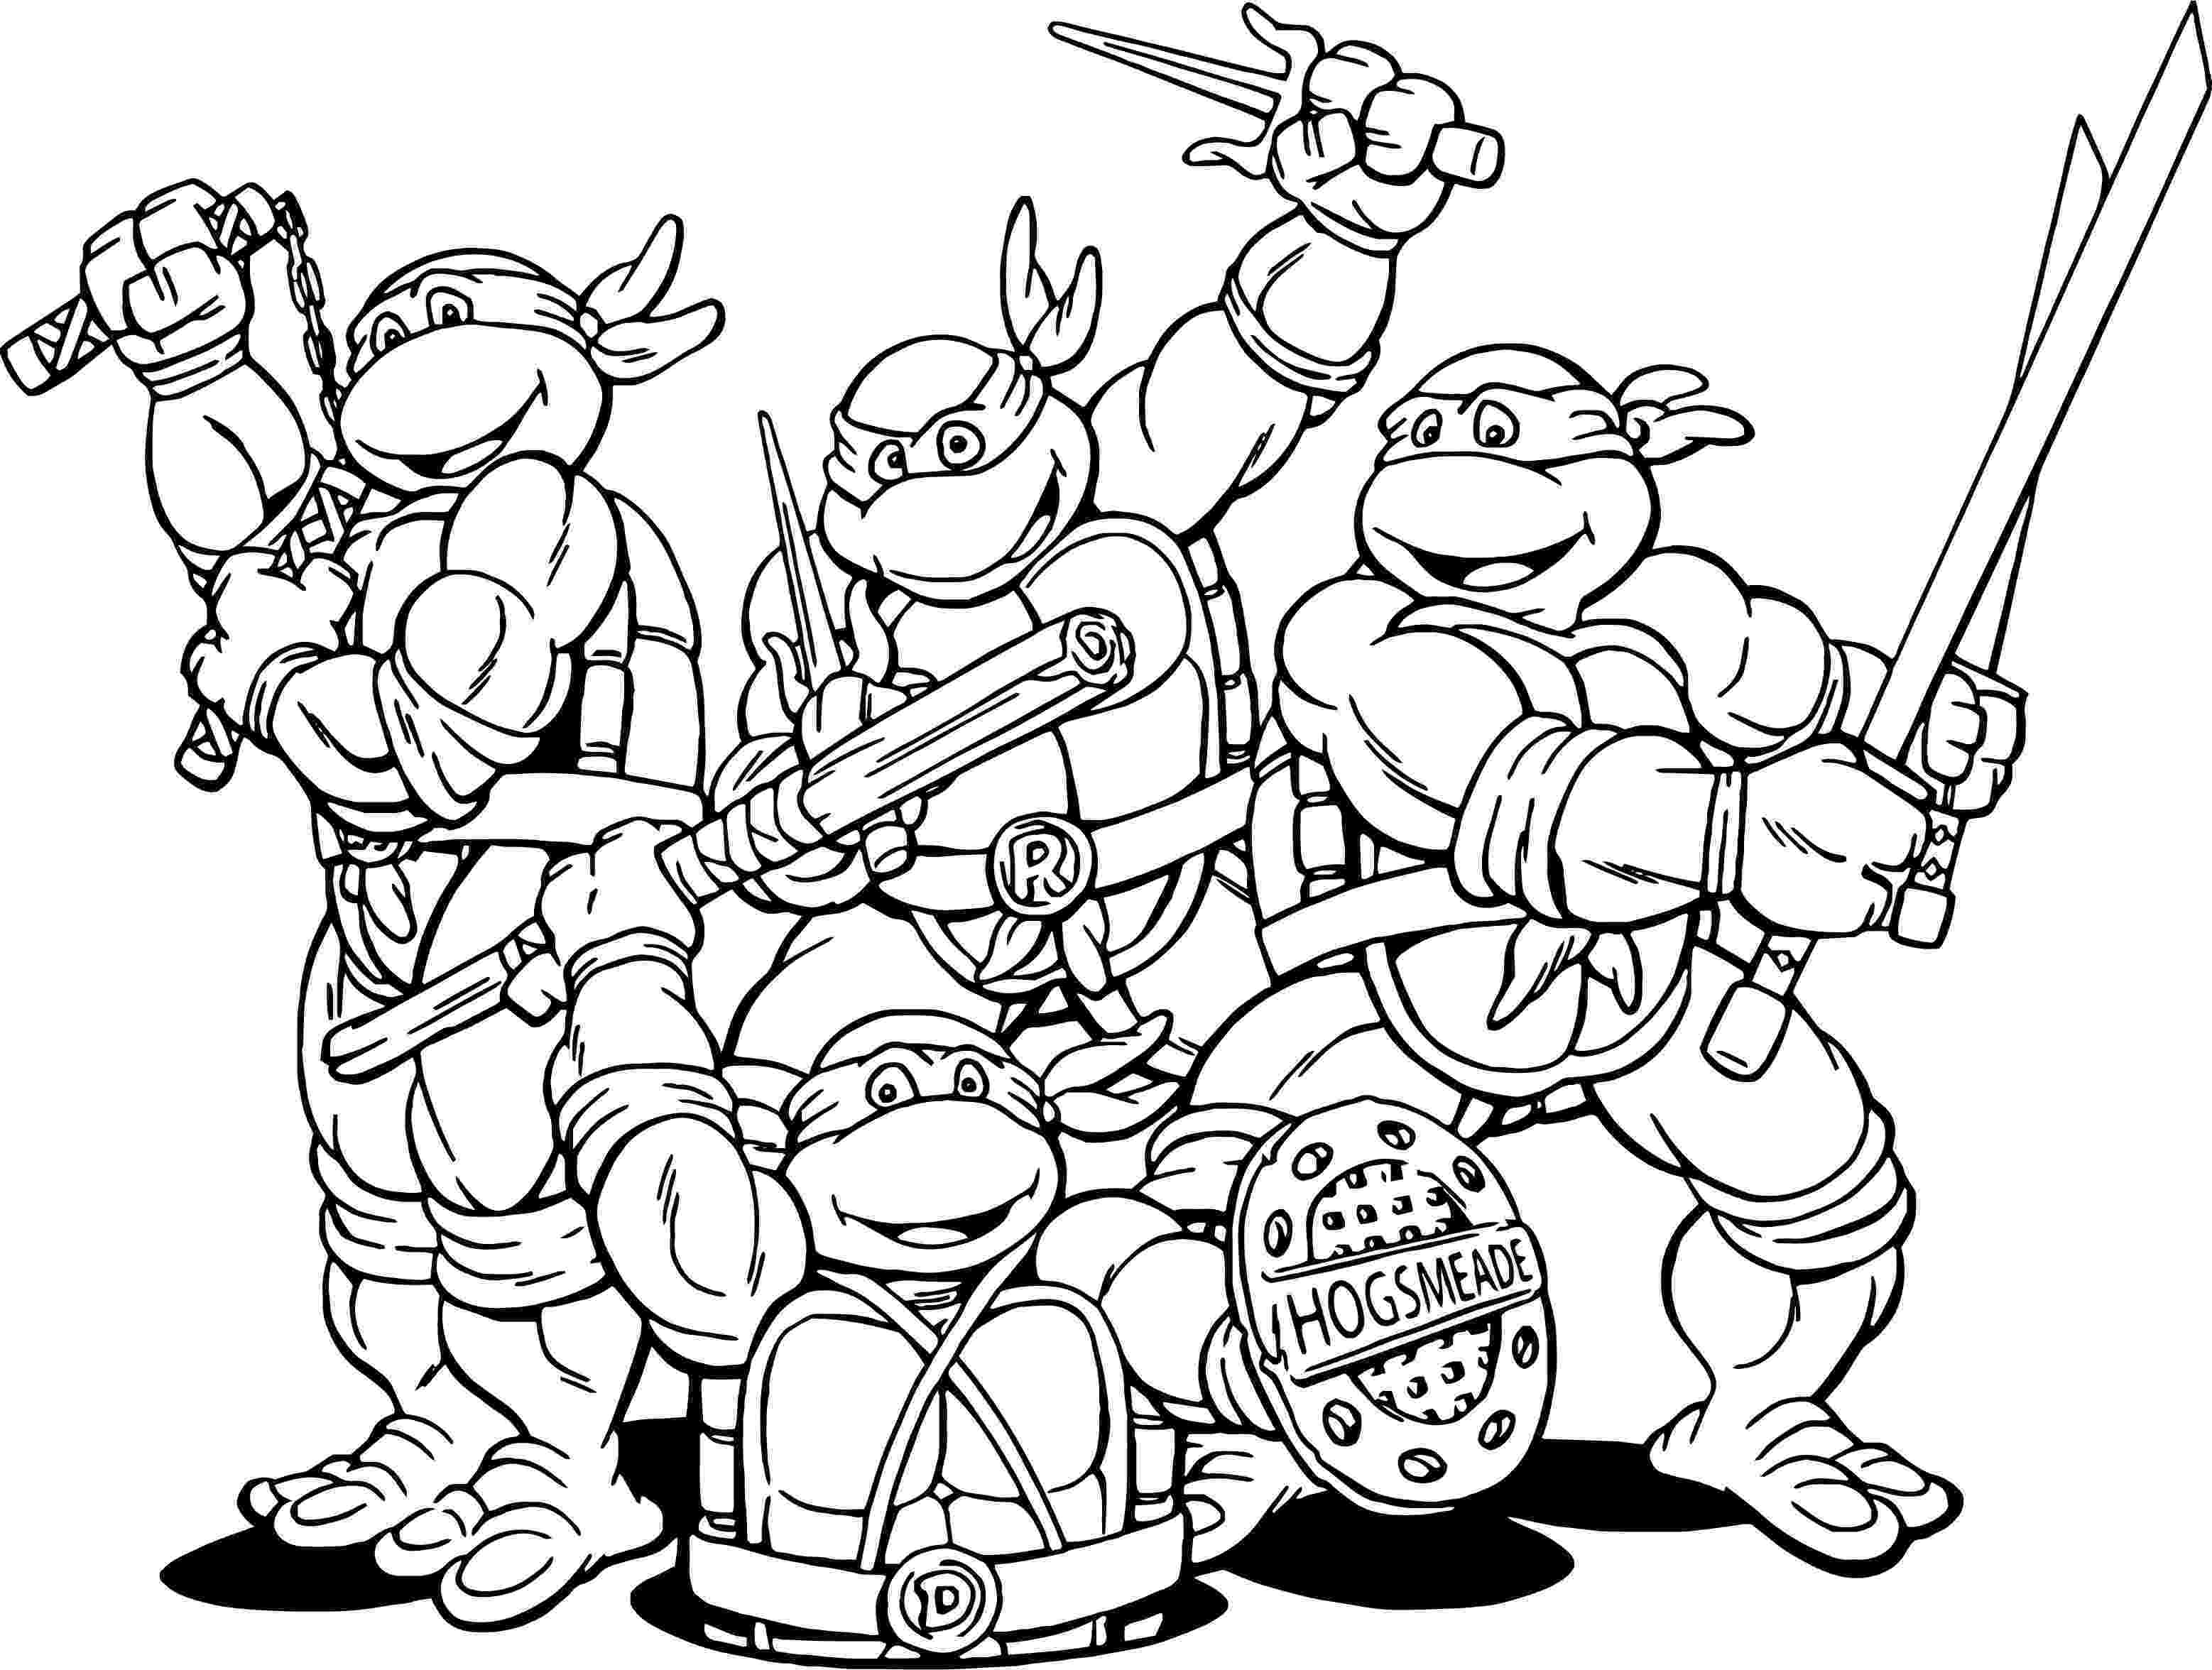 ninja turtle coloring sheets print download the attractive ninja coloring pages for sheets turtle coloring ninja 